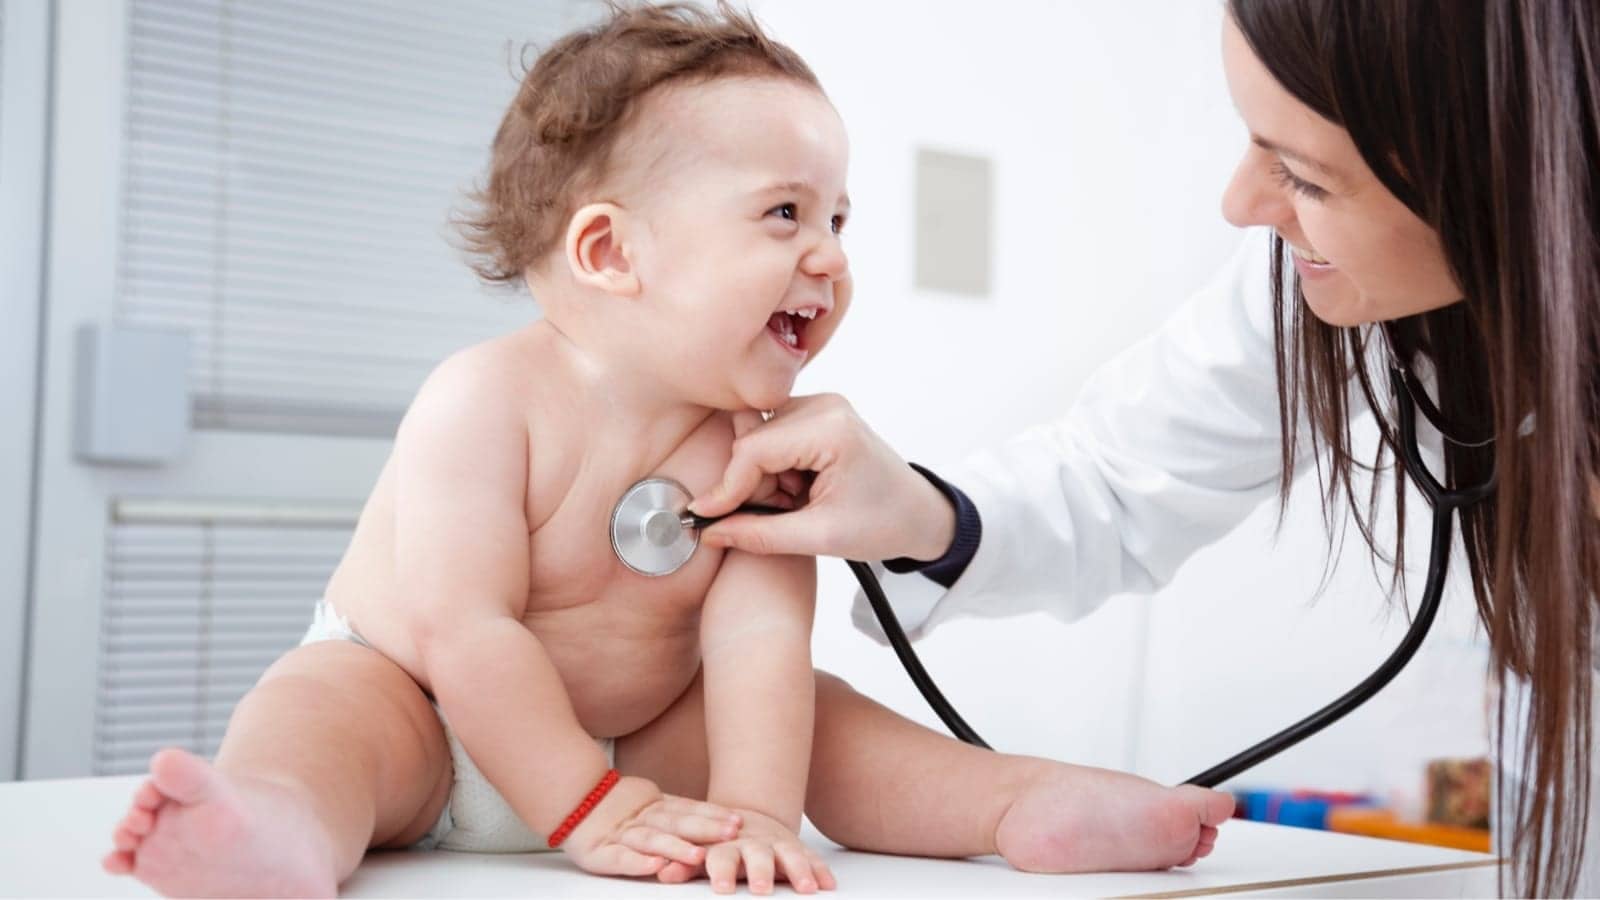 doctor with stethoscope checking babies heartbeat